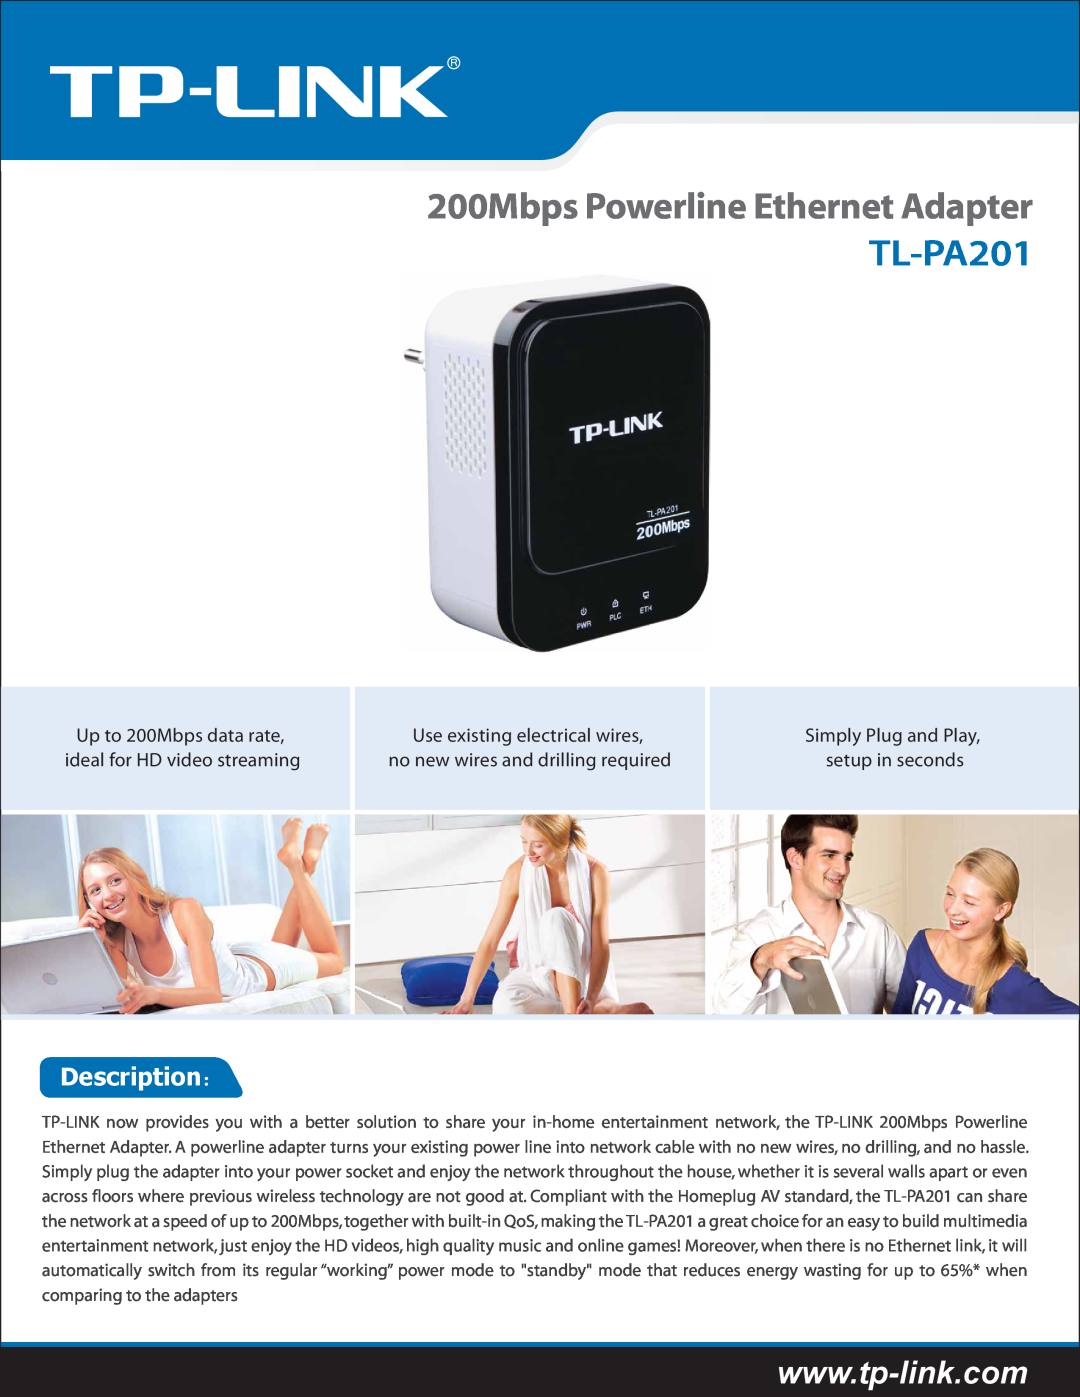 TP-Link manual Description：, 200Mbps Powerline Ethernet Adapter TL-PA201, Up to 200Mbps data rate, Simply Plug and Play 